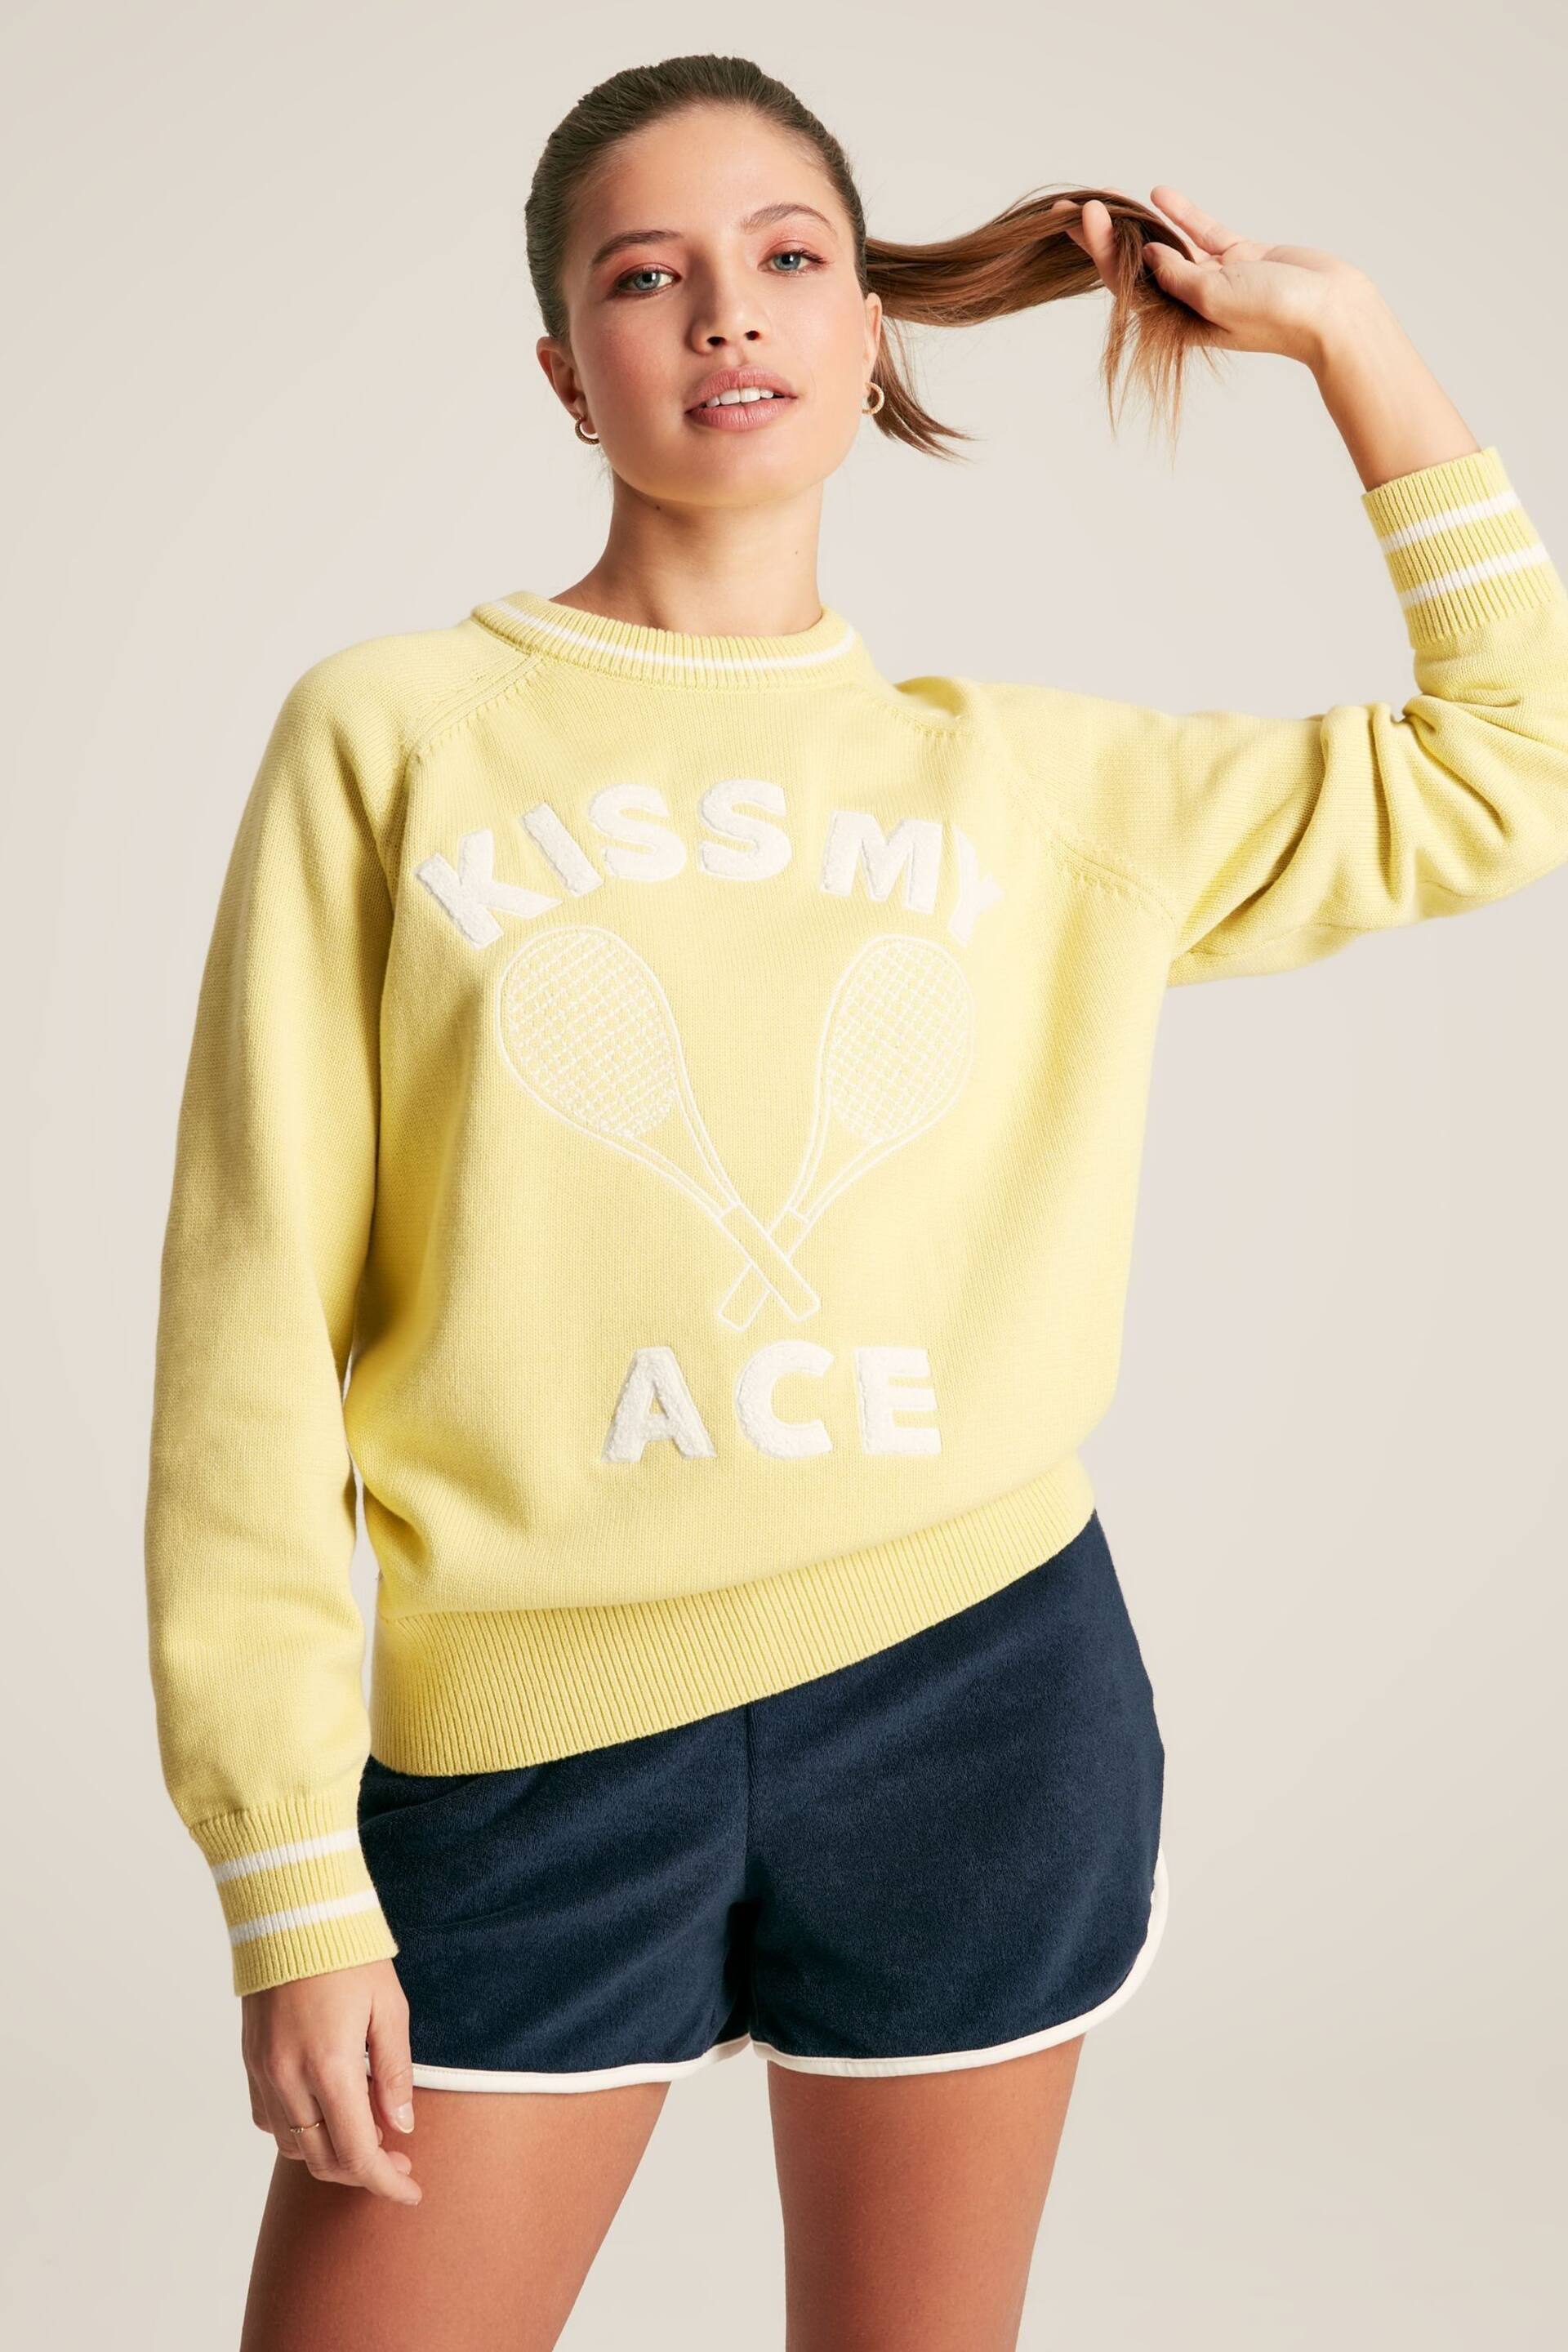 Joules Break Point Yellow Knitted Tennis Jumper - Image 1 of 6